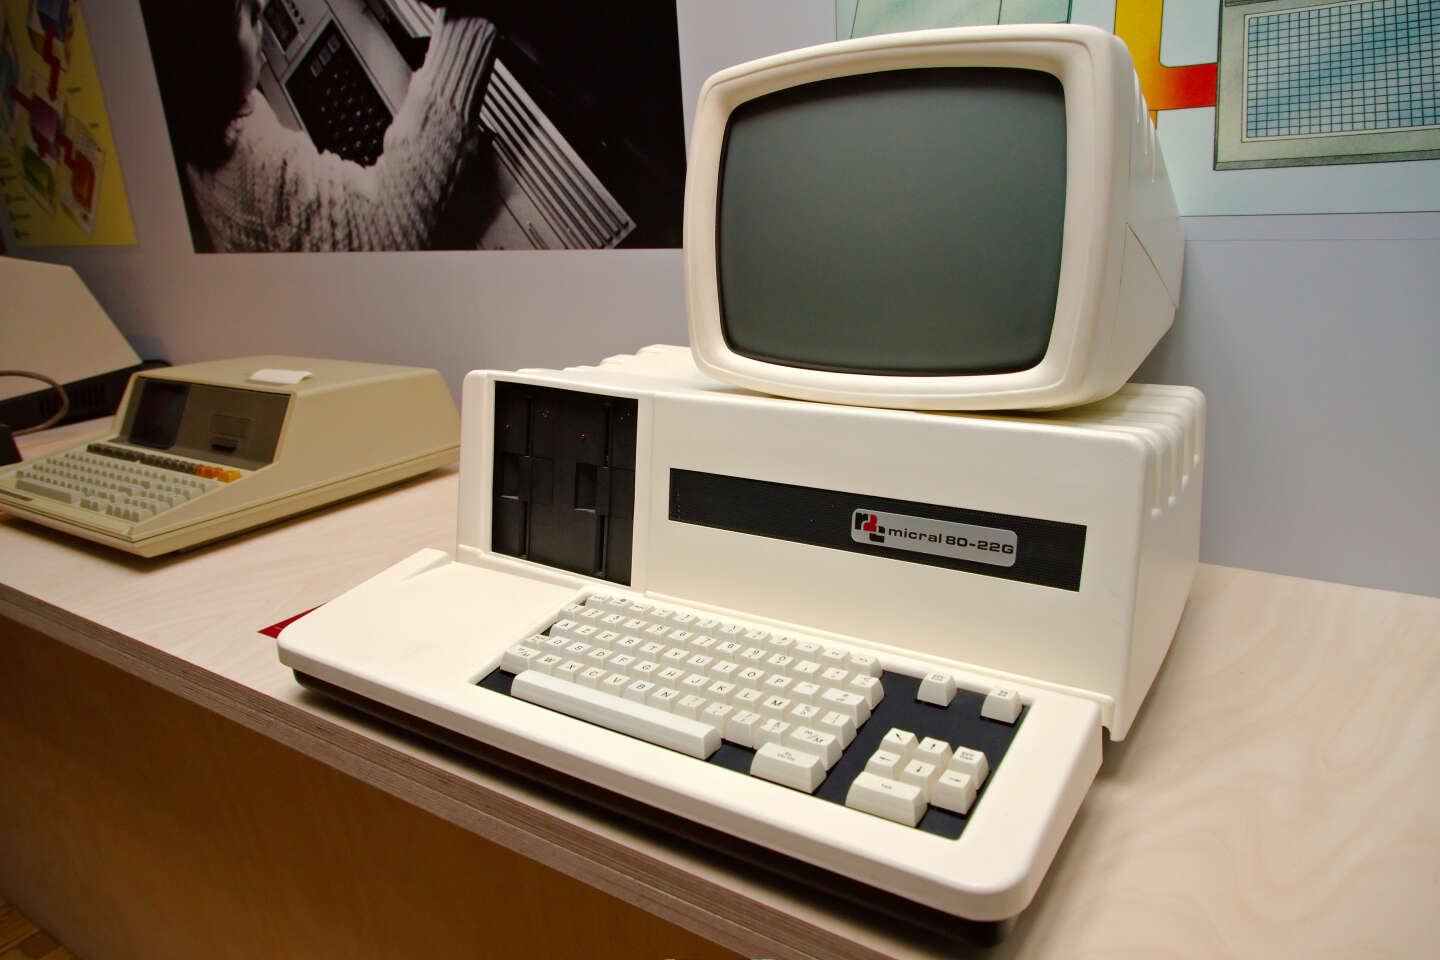 Fifty years ago, in France, the Micral N was born, the first commercial microcomputer in the world